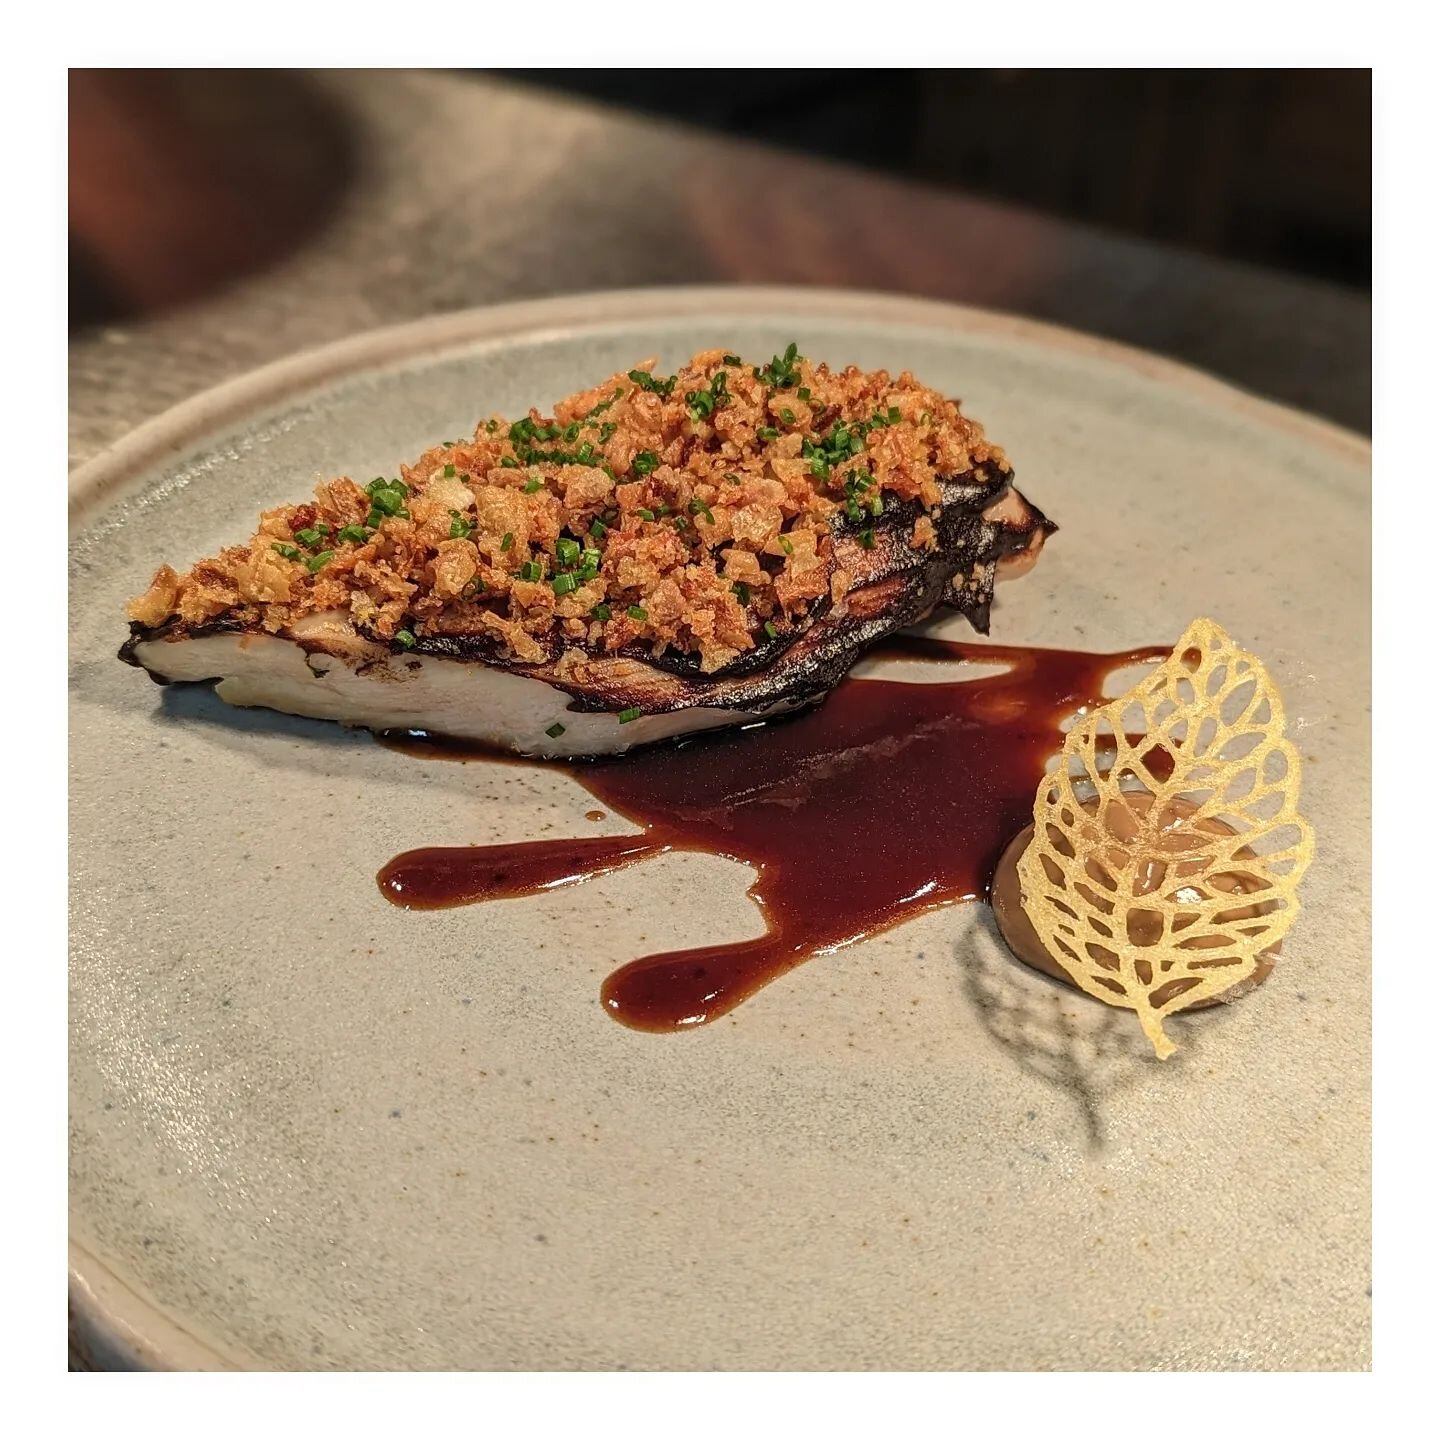 WINNER WINNER CHICKEN DINNER

Introducing our wedding breakfast main course - a succulent corn fed chicken with crispy chicken skin, smoked chicken jus, and mushroom ketchup! 🍗🍄 This dish is a true celebration of flavor and texture! 🤤 Trust us, yo